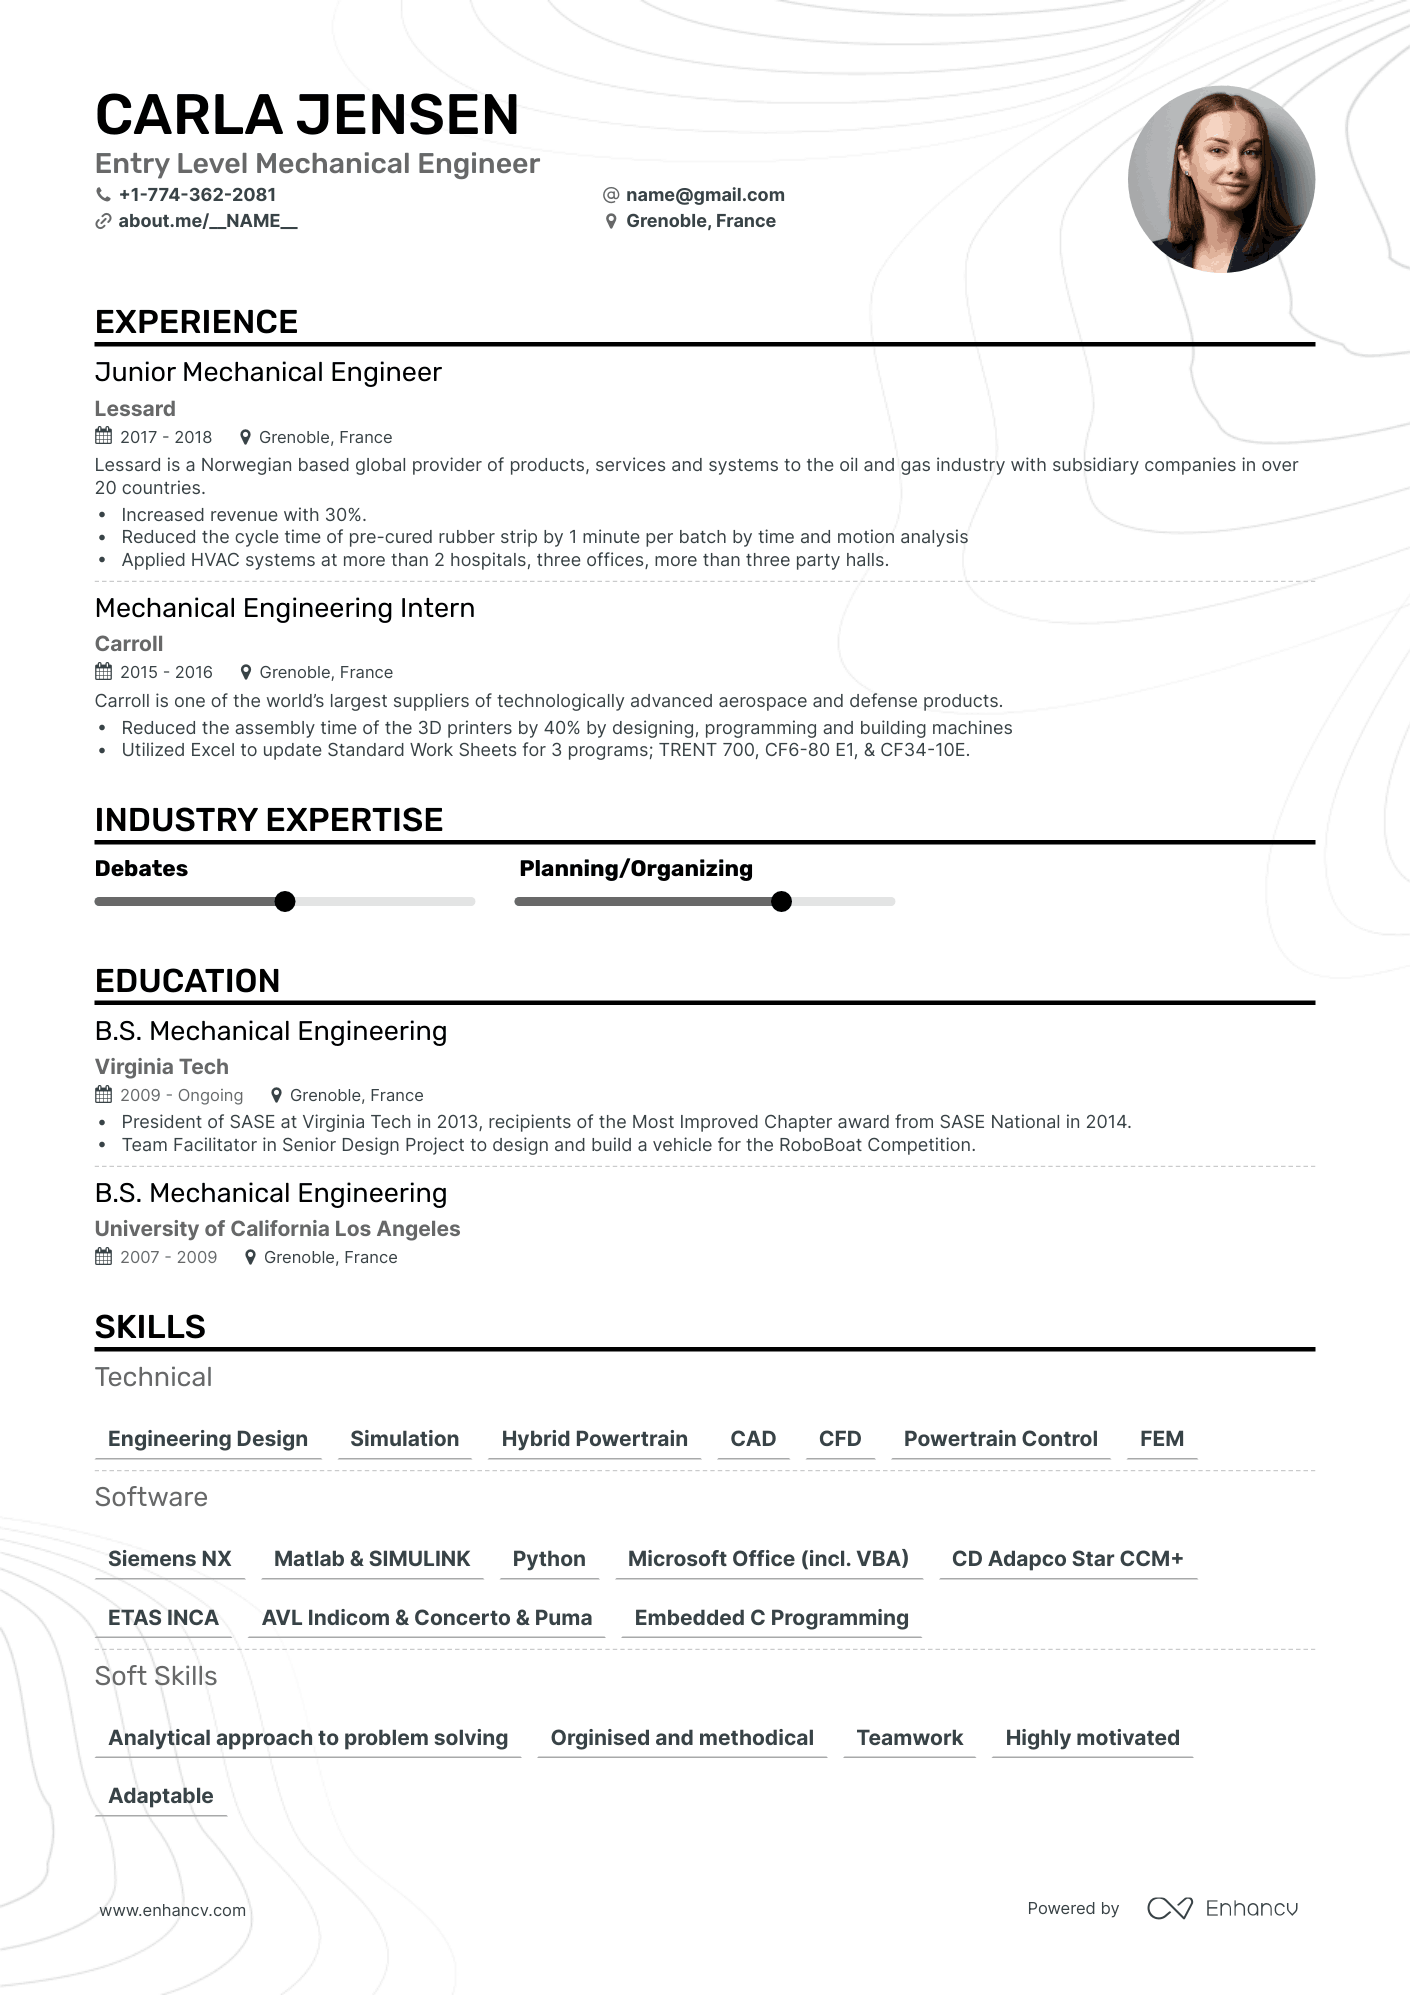 Classic Entry Level Mechanical Engineer Resume Template